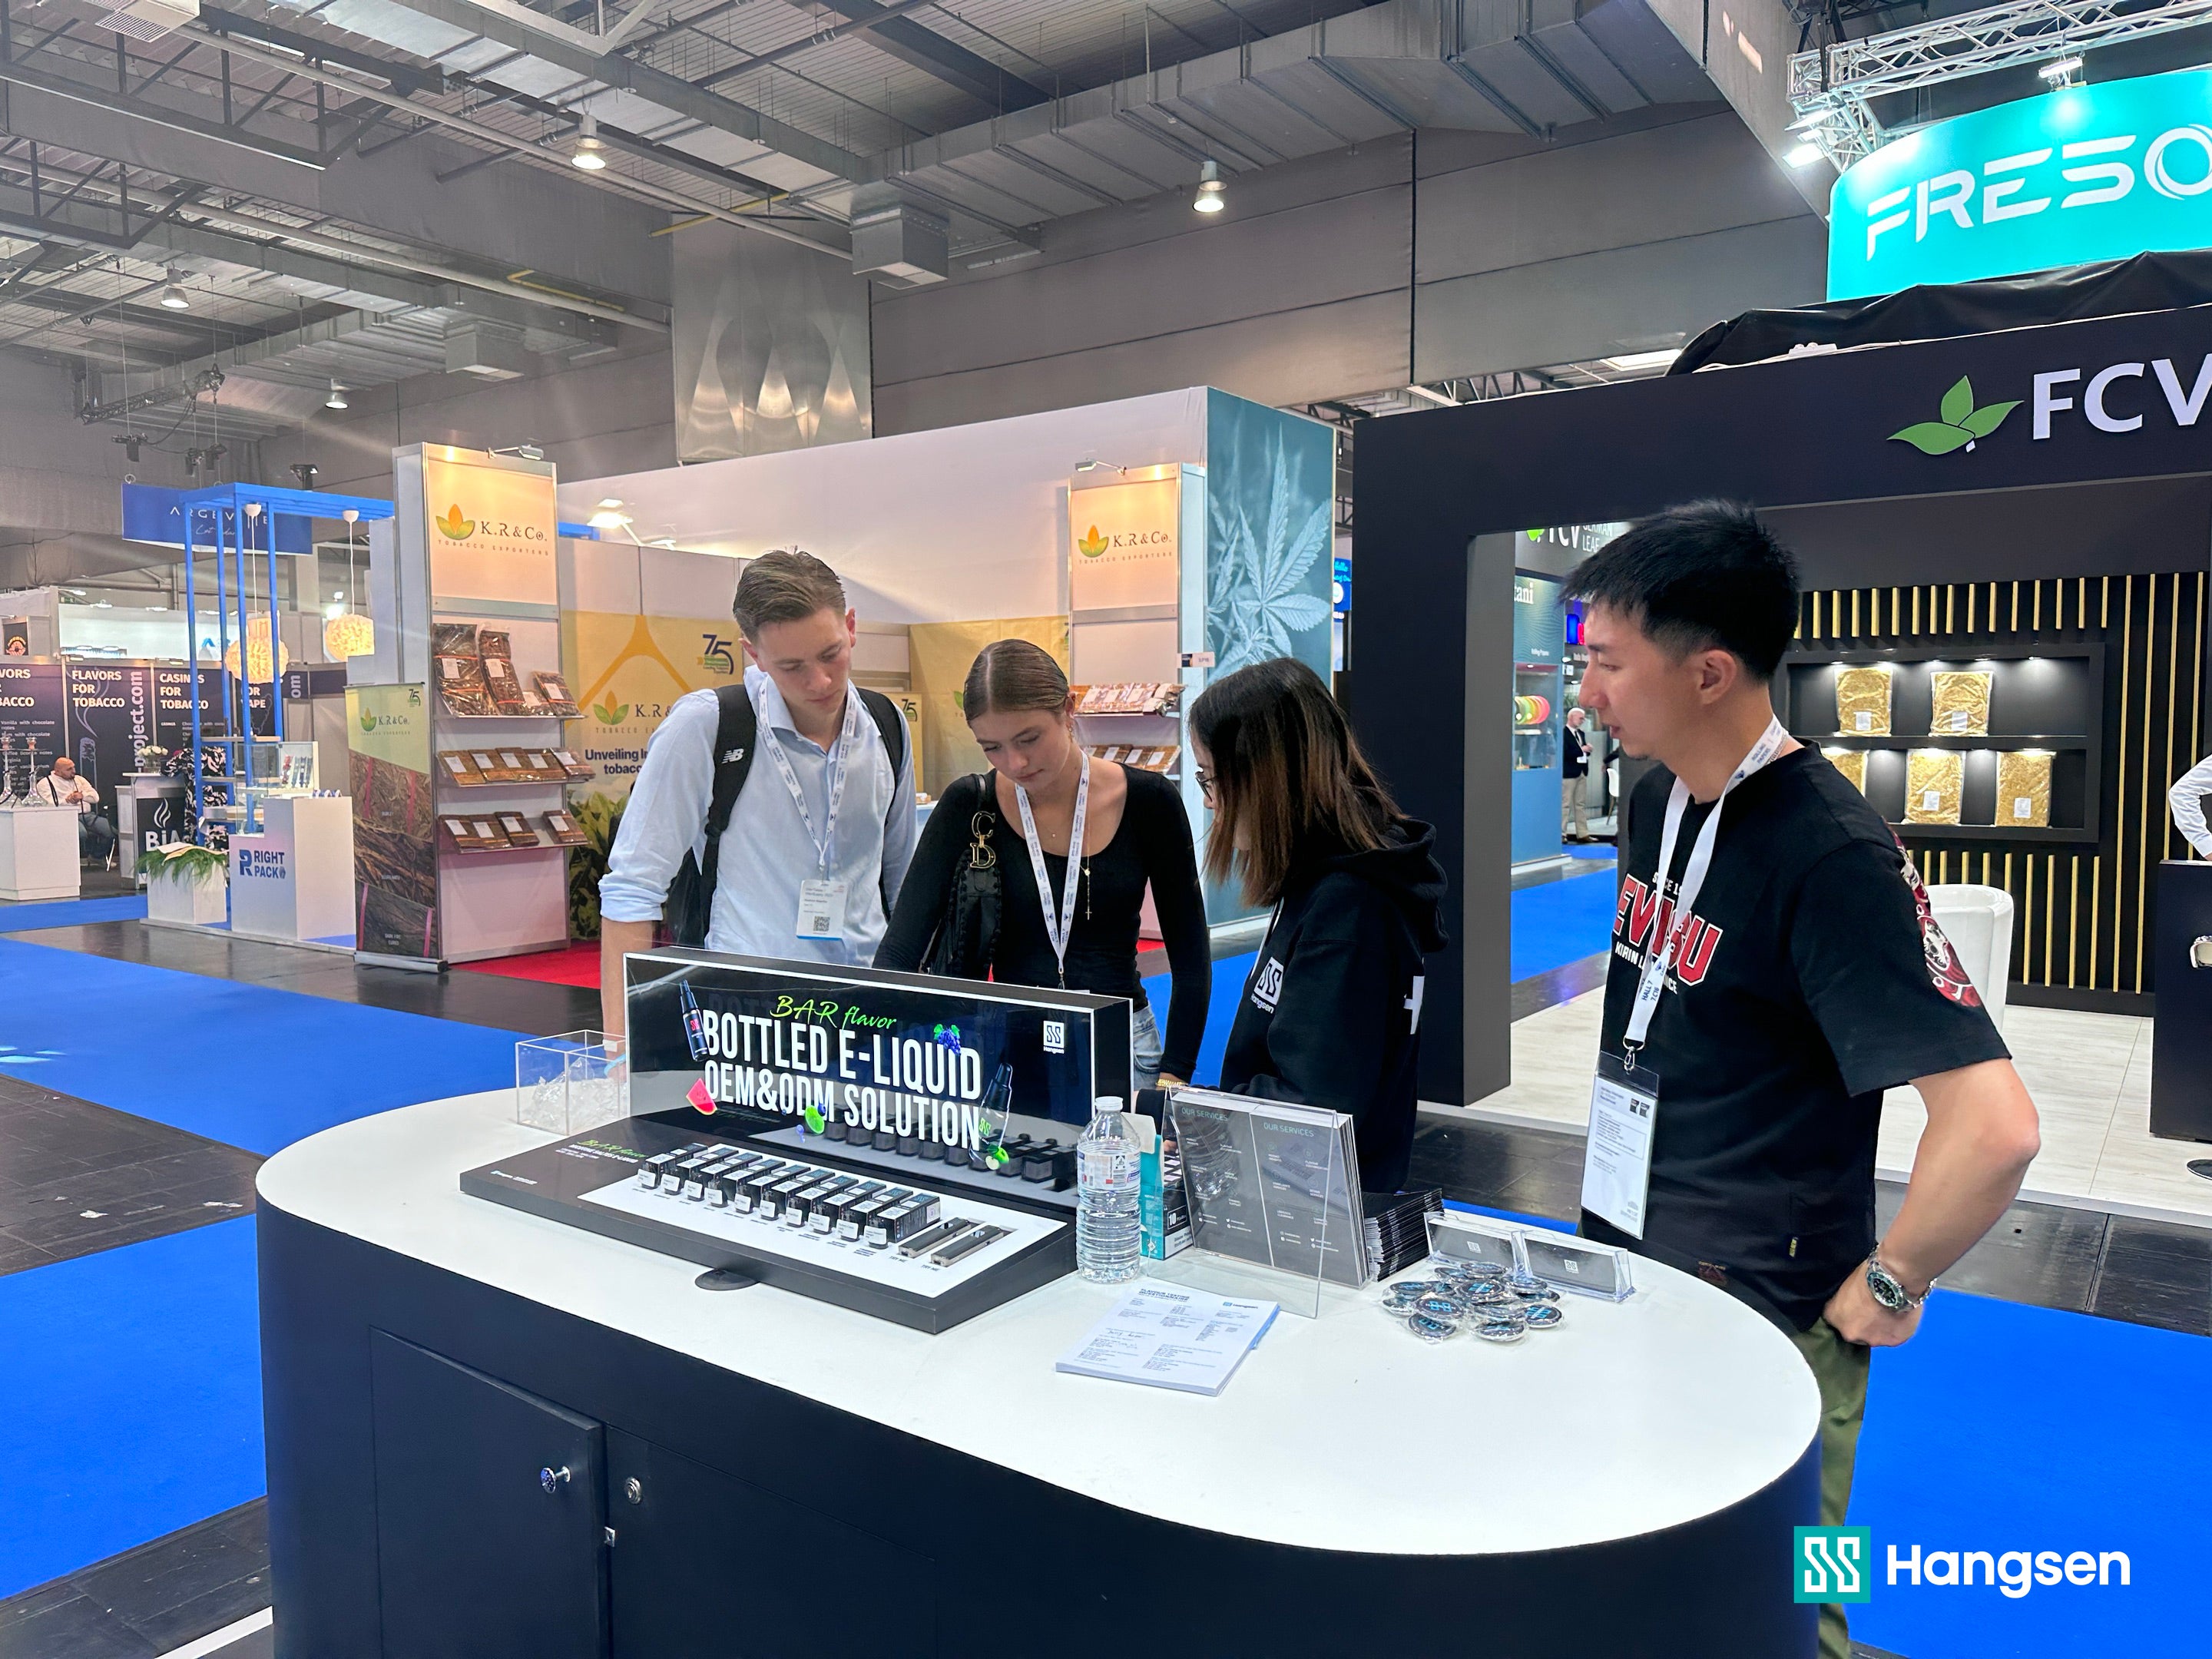 Attendees explore Hangsen's Bar Flavor Bottled E-Liquid OEM&ODM Solution at a trade show booth, with a sign prominently displayed in the foreground. The booth is staffed by two individuals engaging with visitors amidst a bustling exhibition hall.